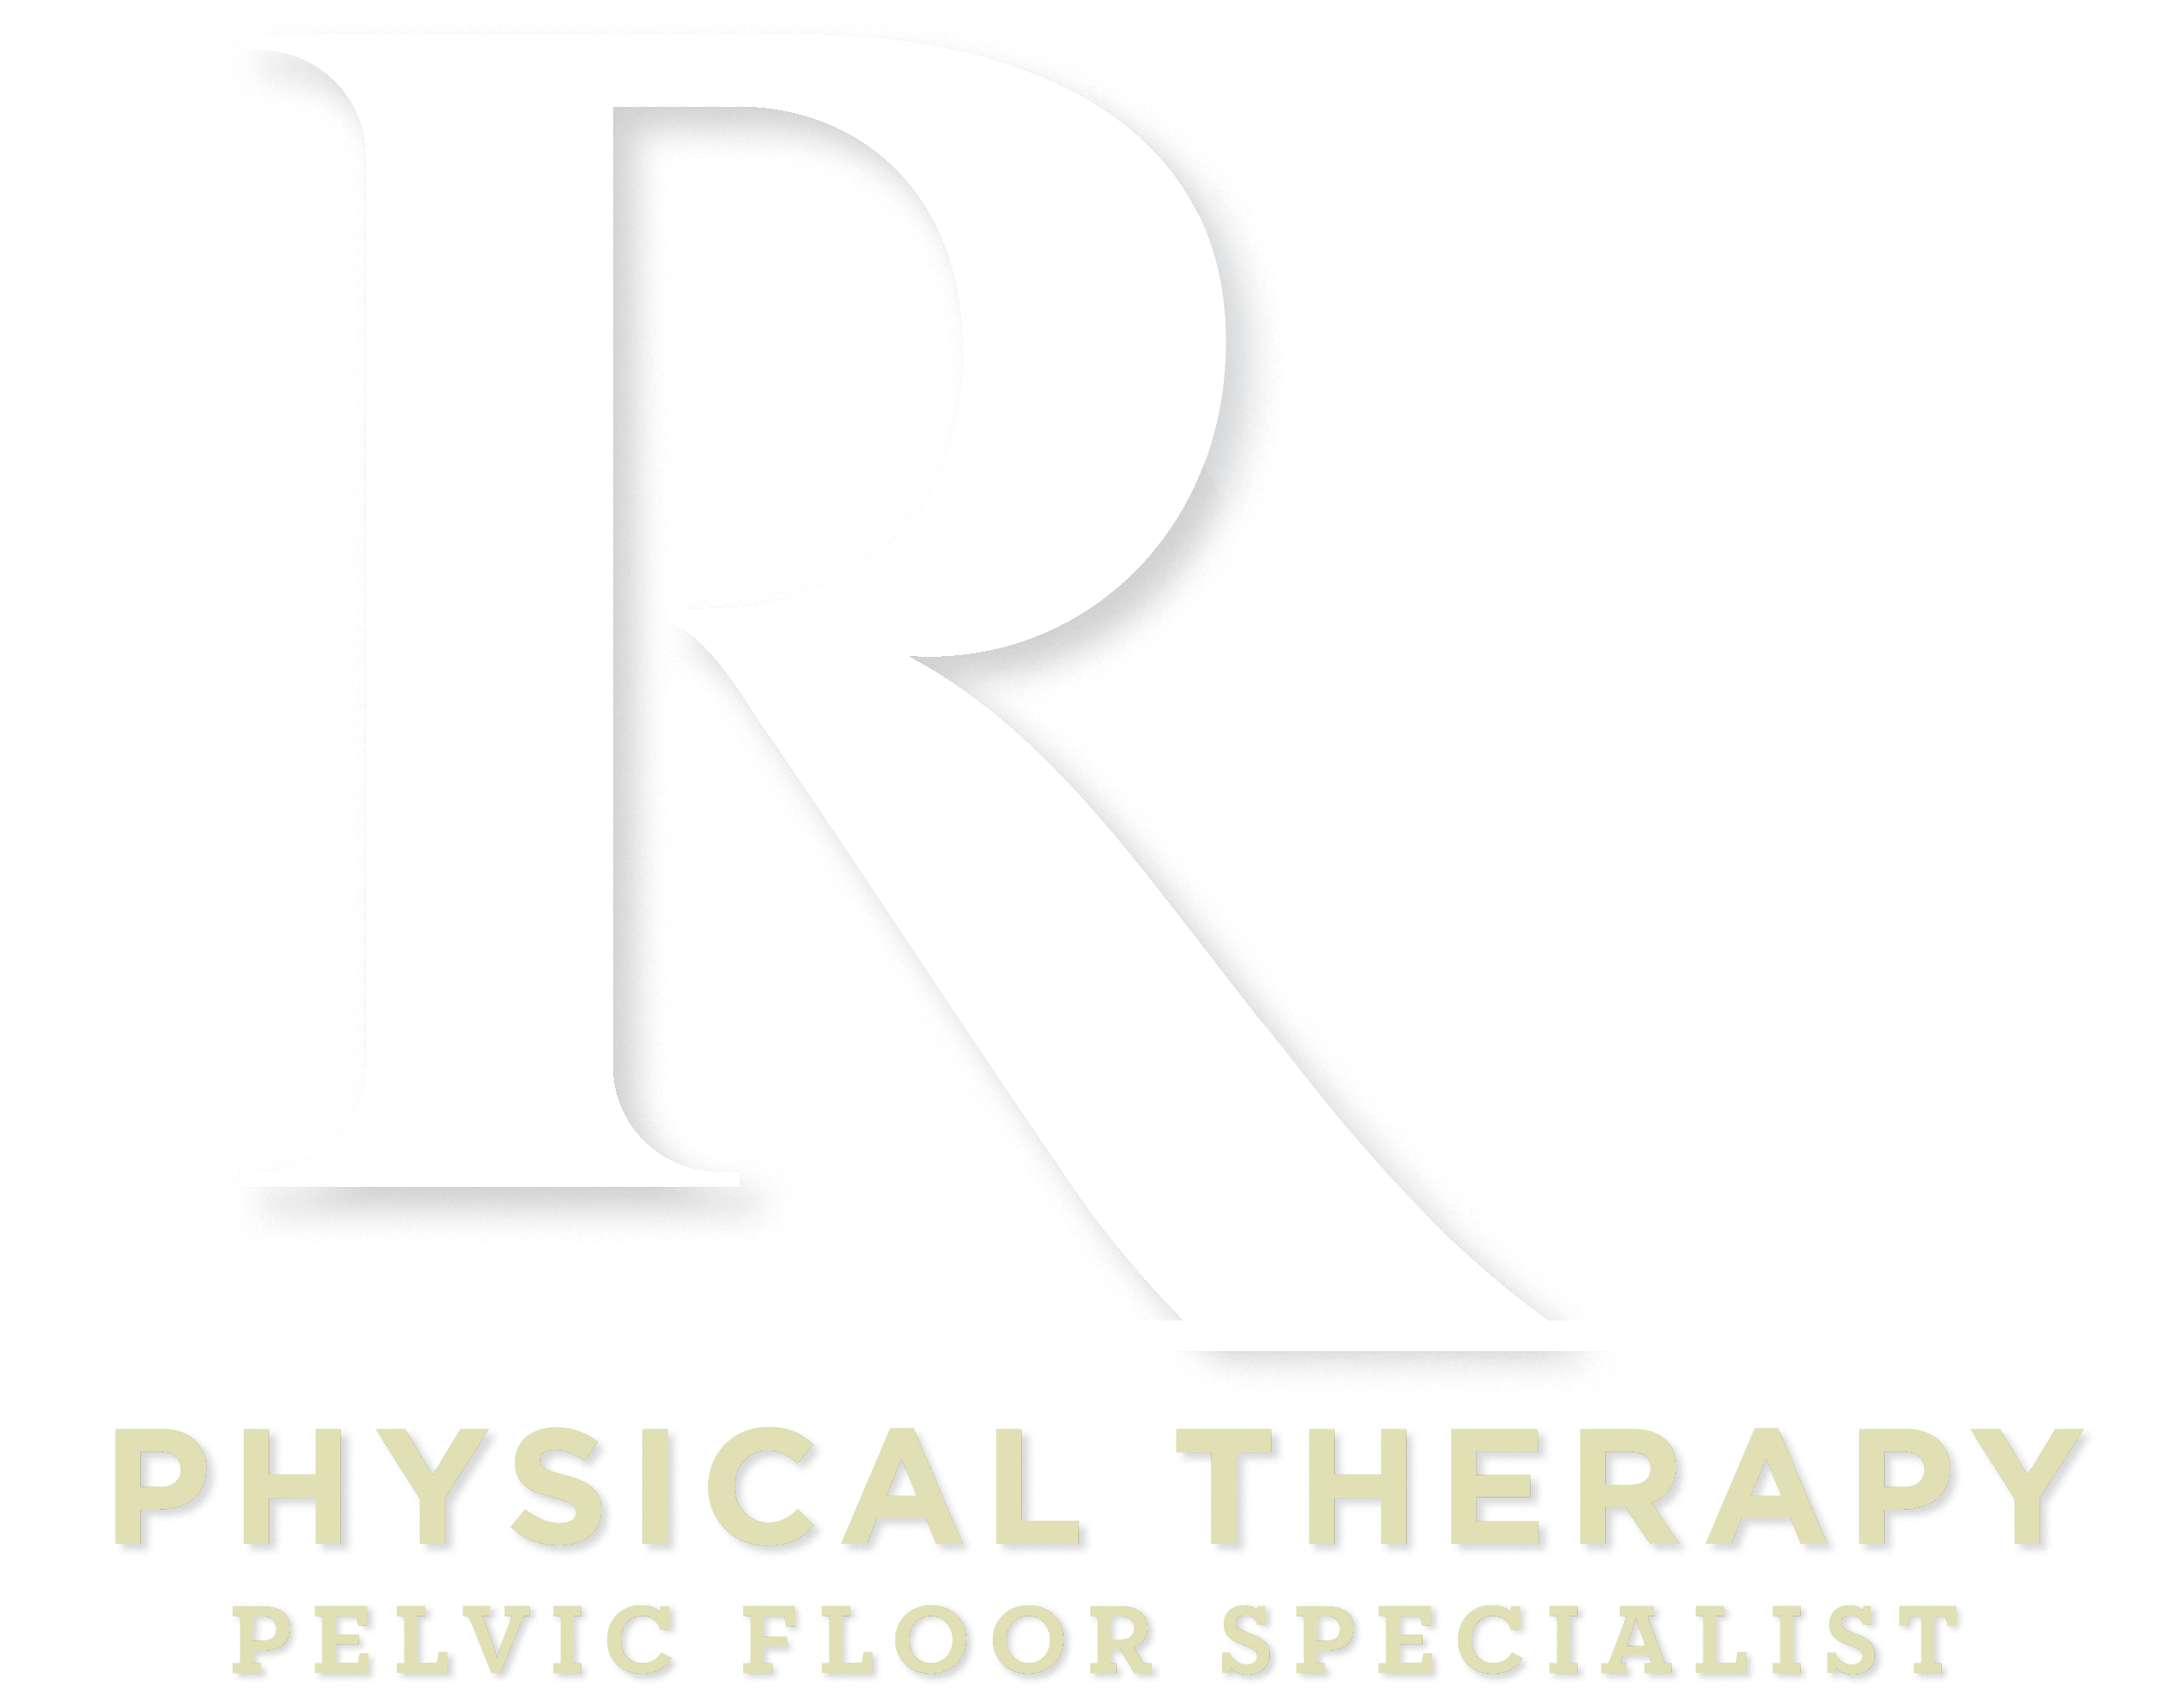 rs physical therapy pelvic floor specialist logo